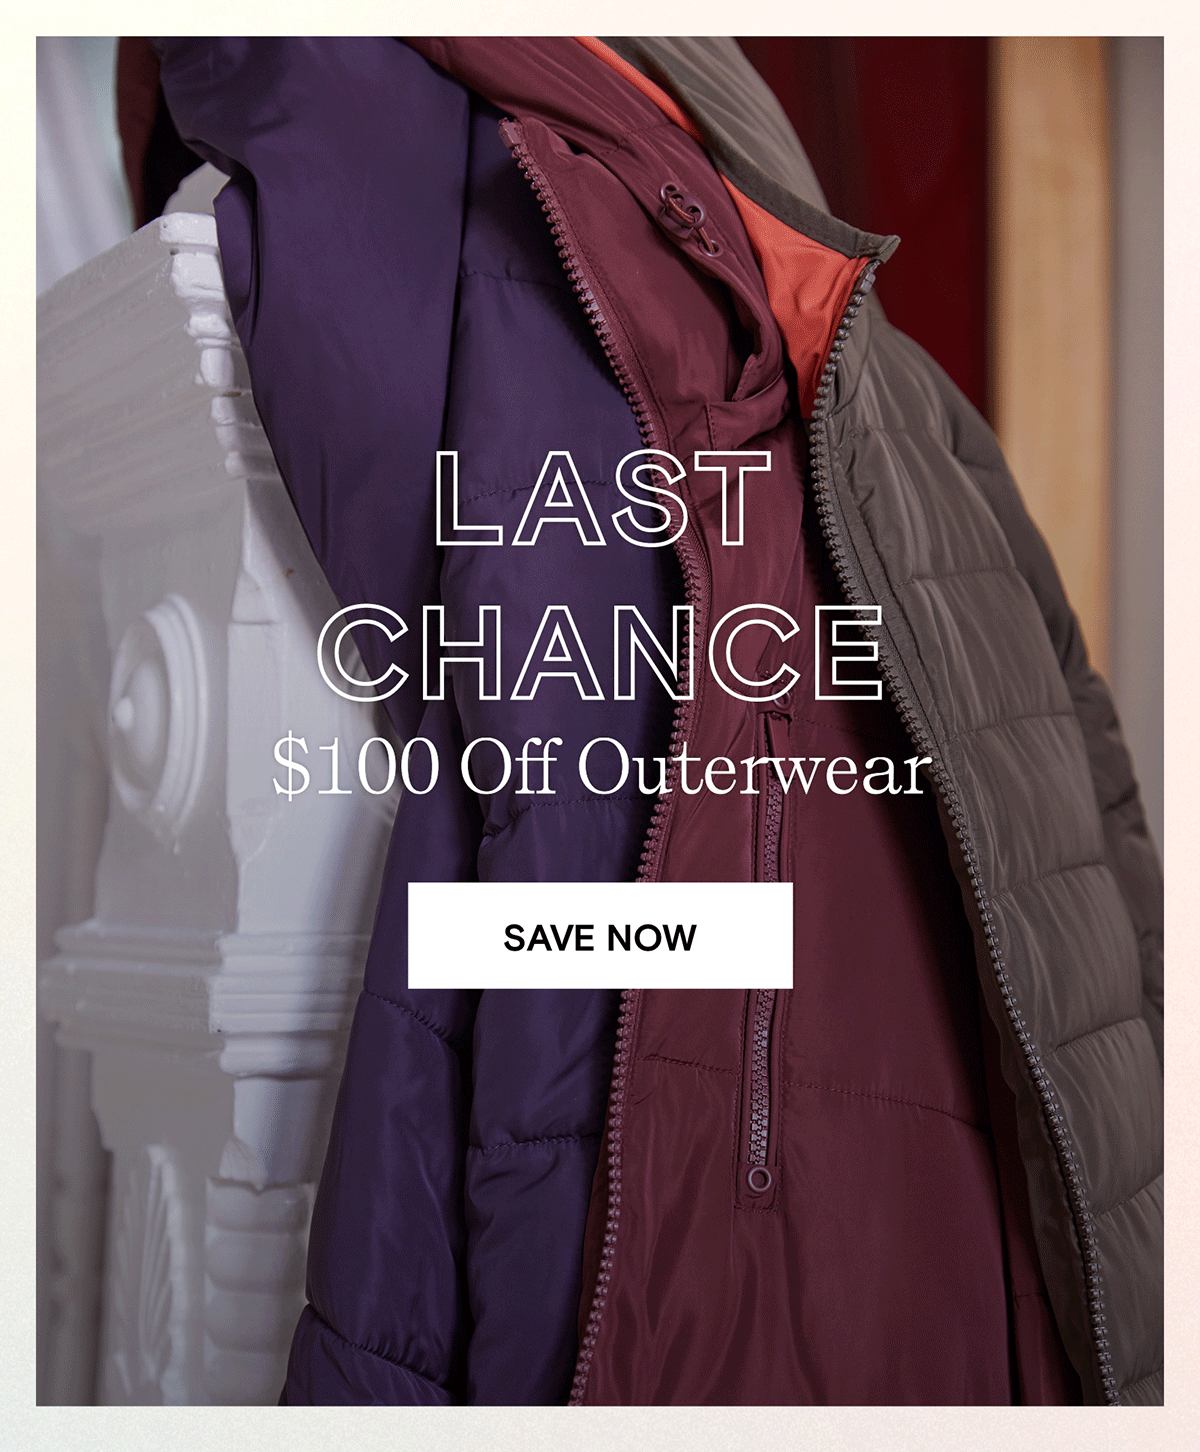 Last chance for $100 of outerwear